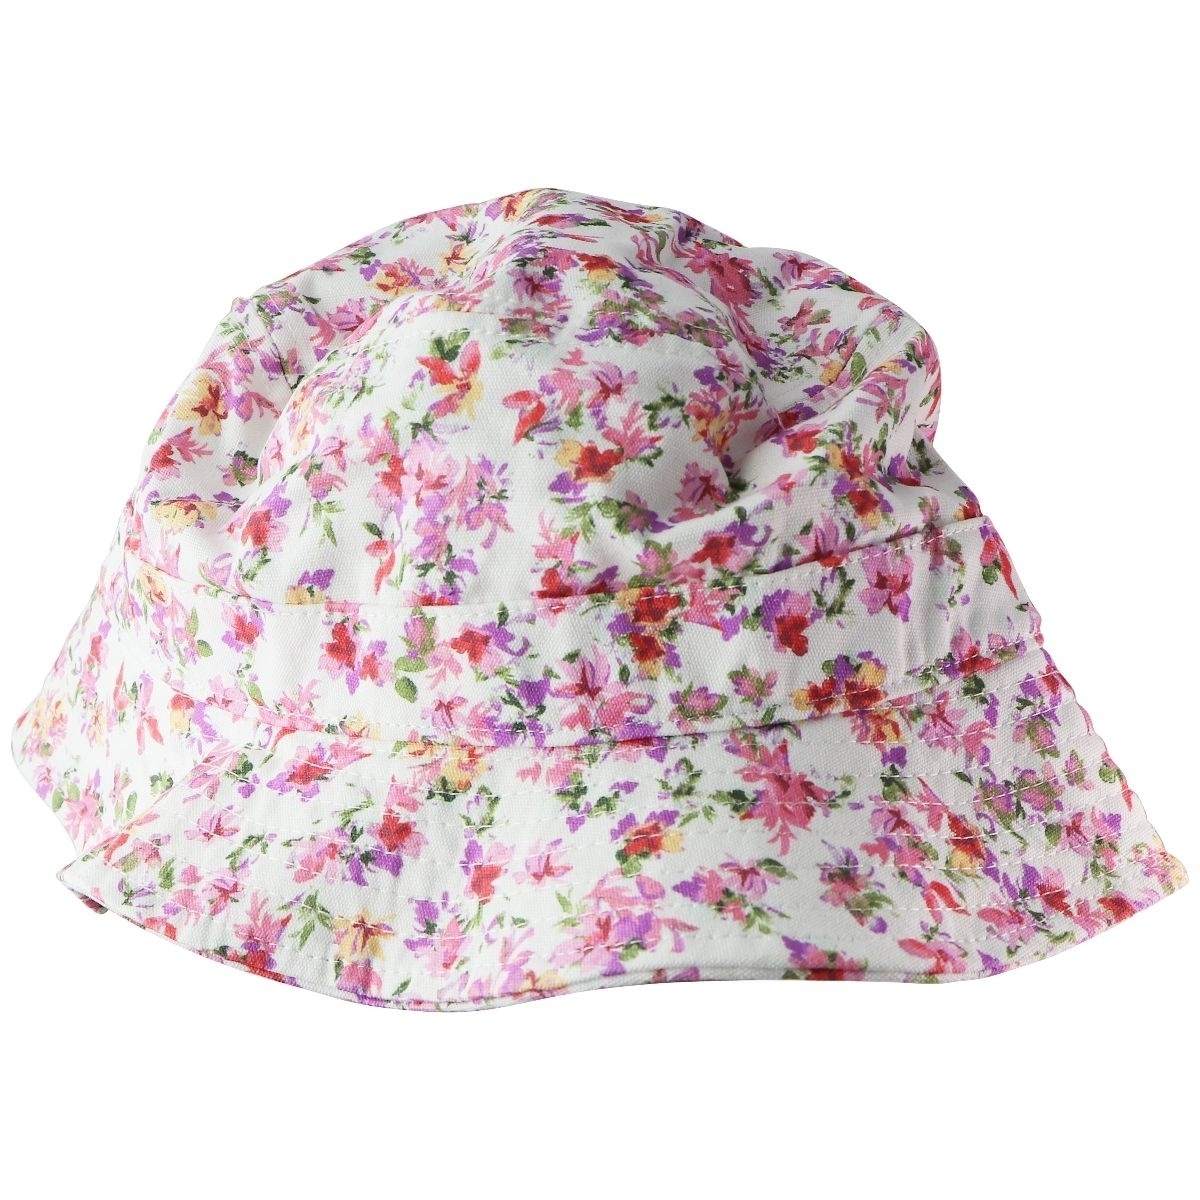 AEROPOSTALE Floral Bucket Hat (One Size Fits All) - White / Floral